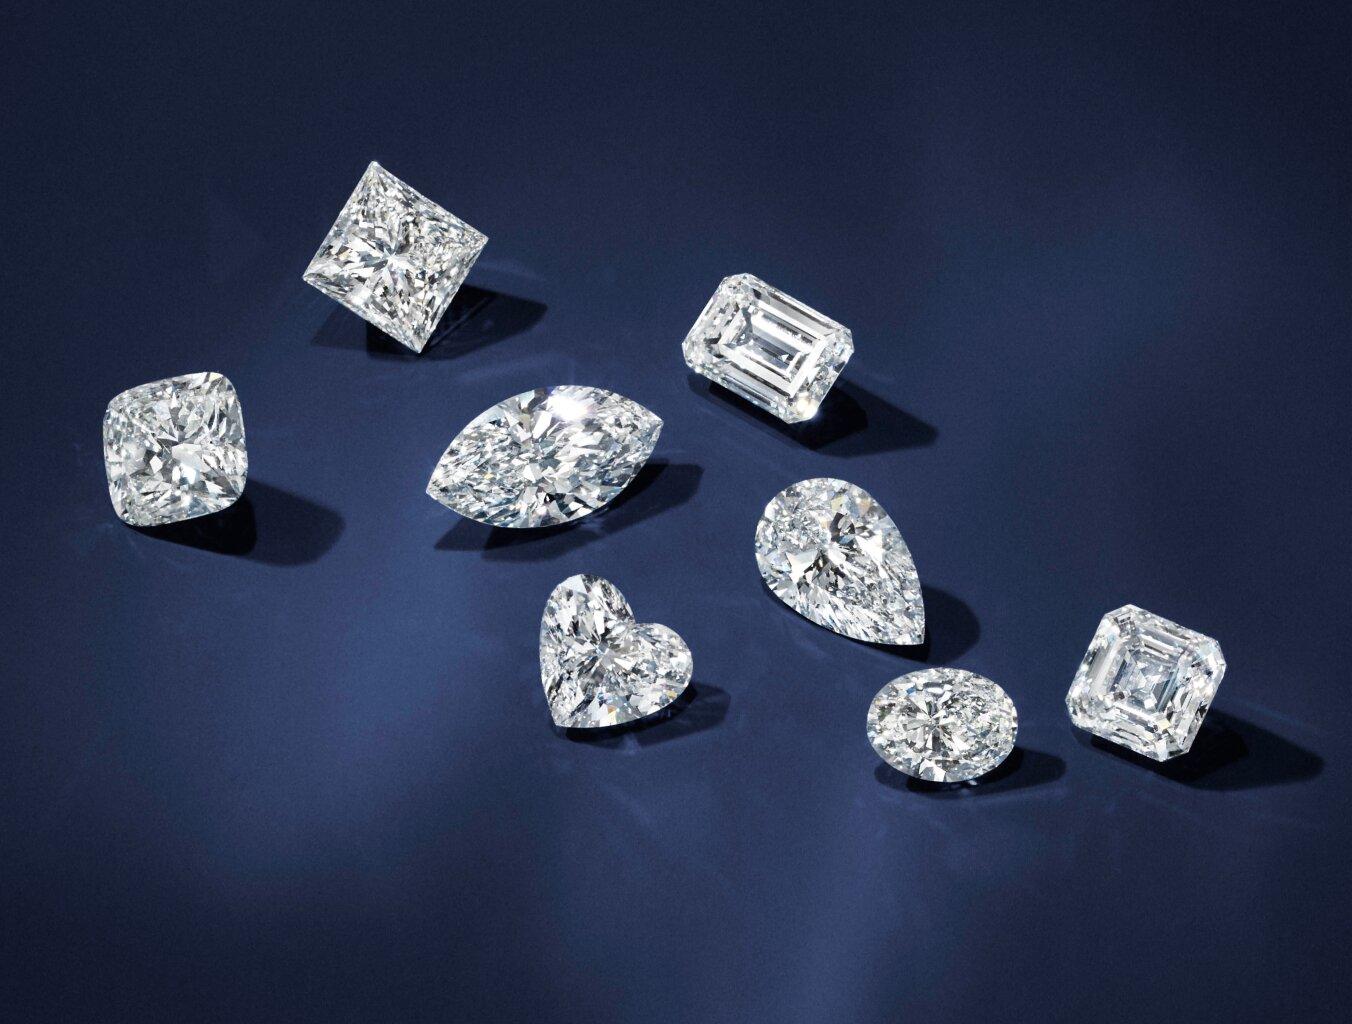 Assortment of loose blockchain diamonds in different shapes.